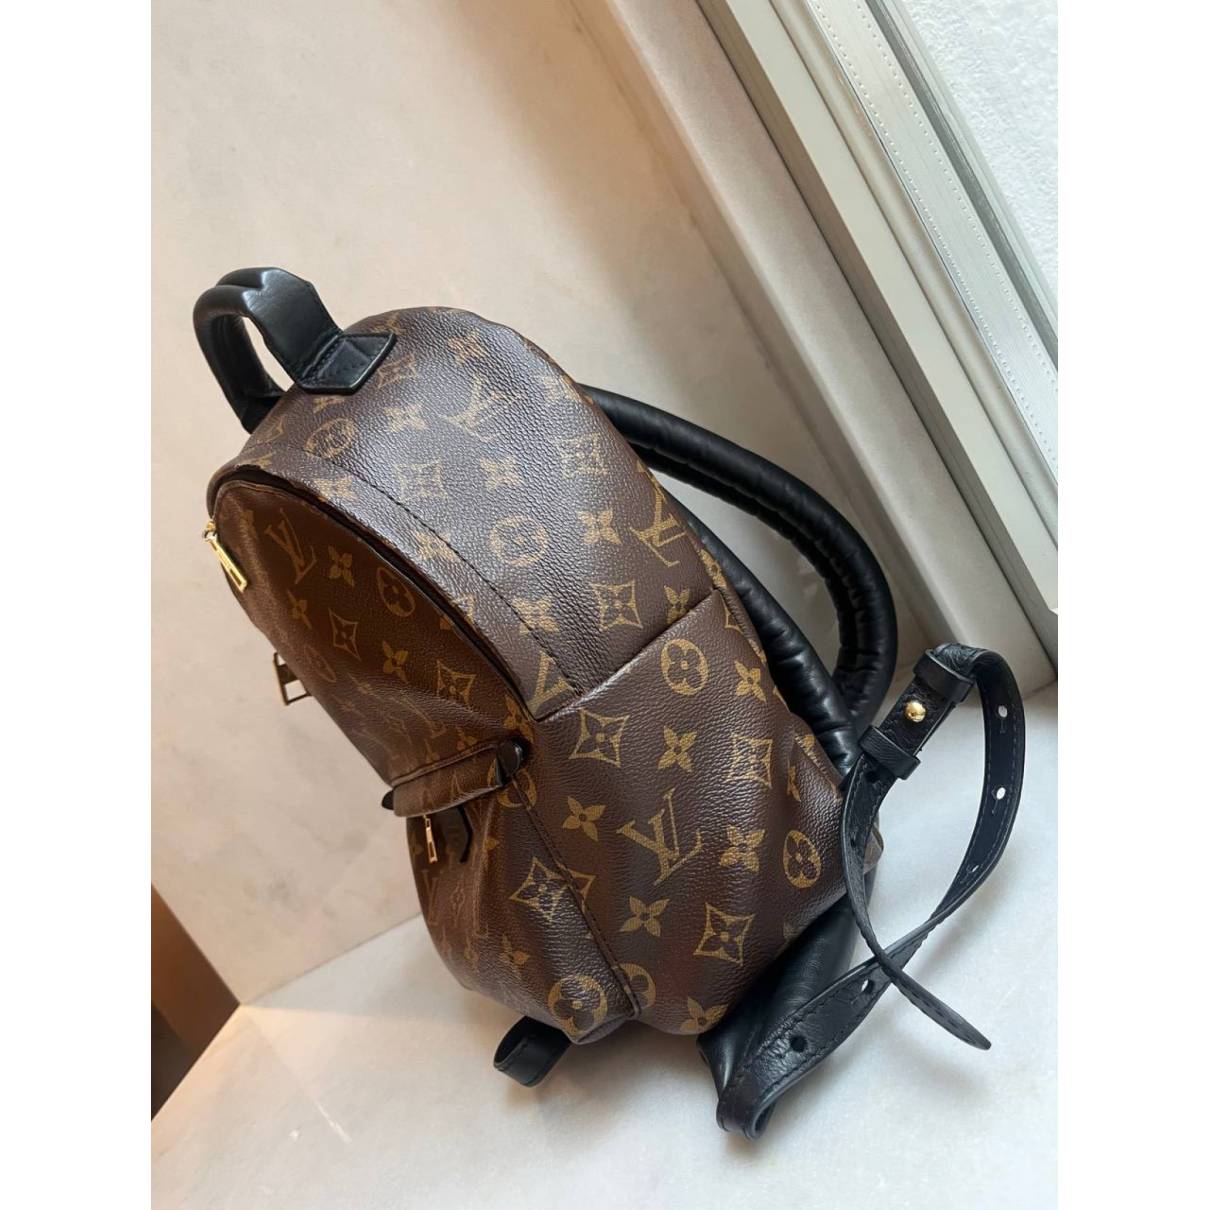 Louis Vuitton palm spring backpack